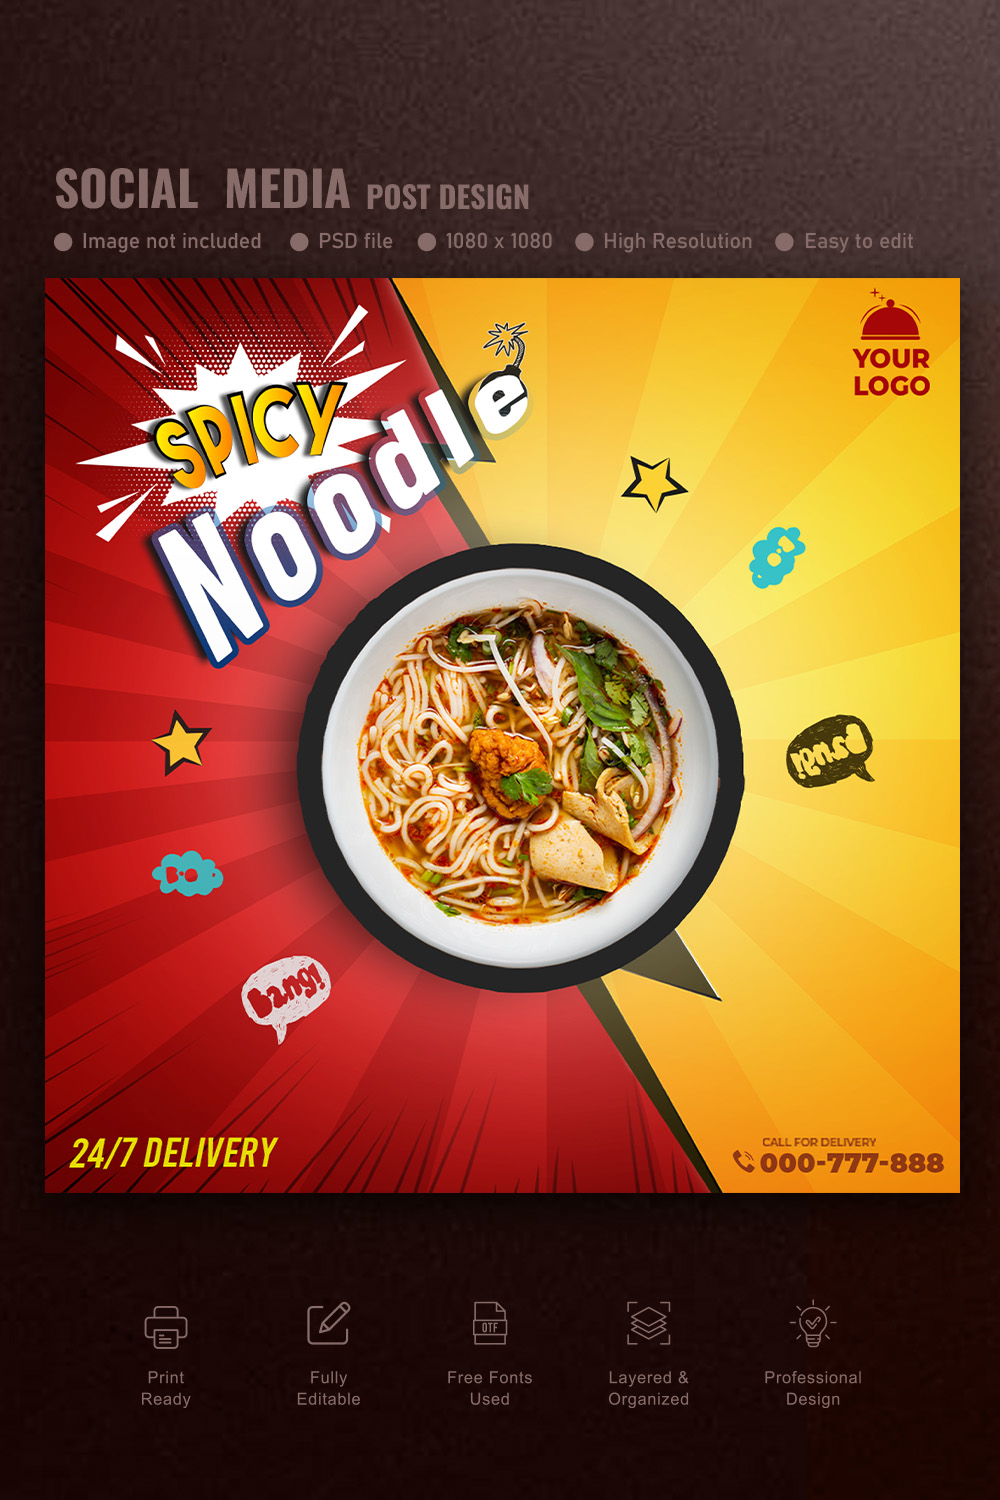 Spicy noodles social media banner template 2 pinterest preview image.